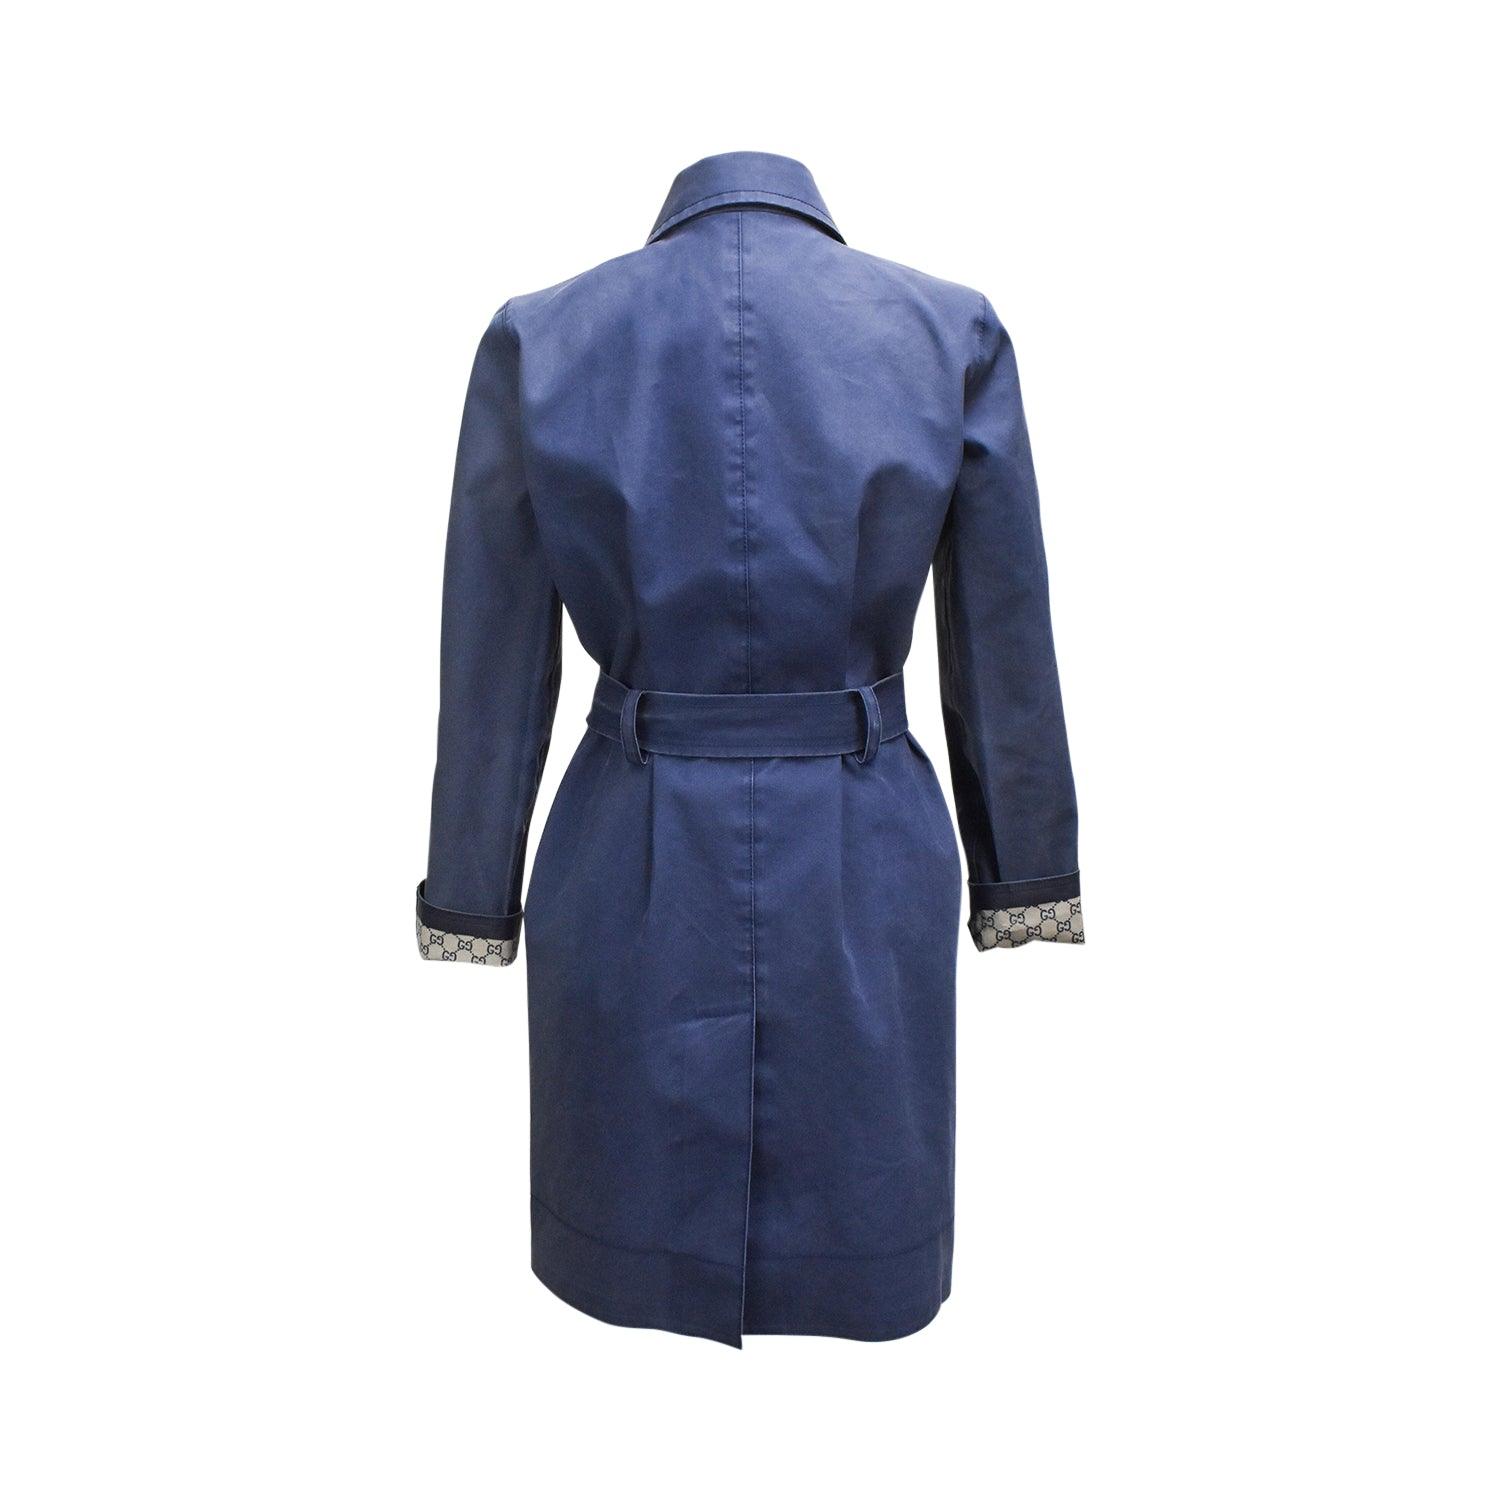 Gucci Trench Coat - Women's 40 - Fashionably Yours